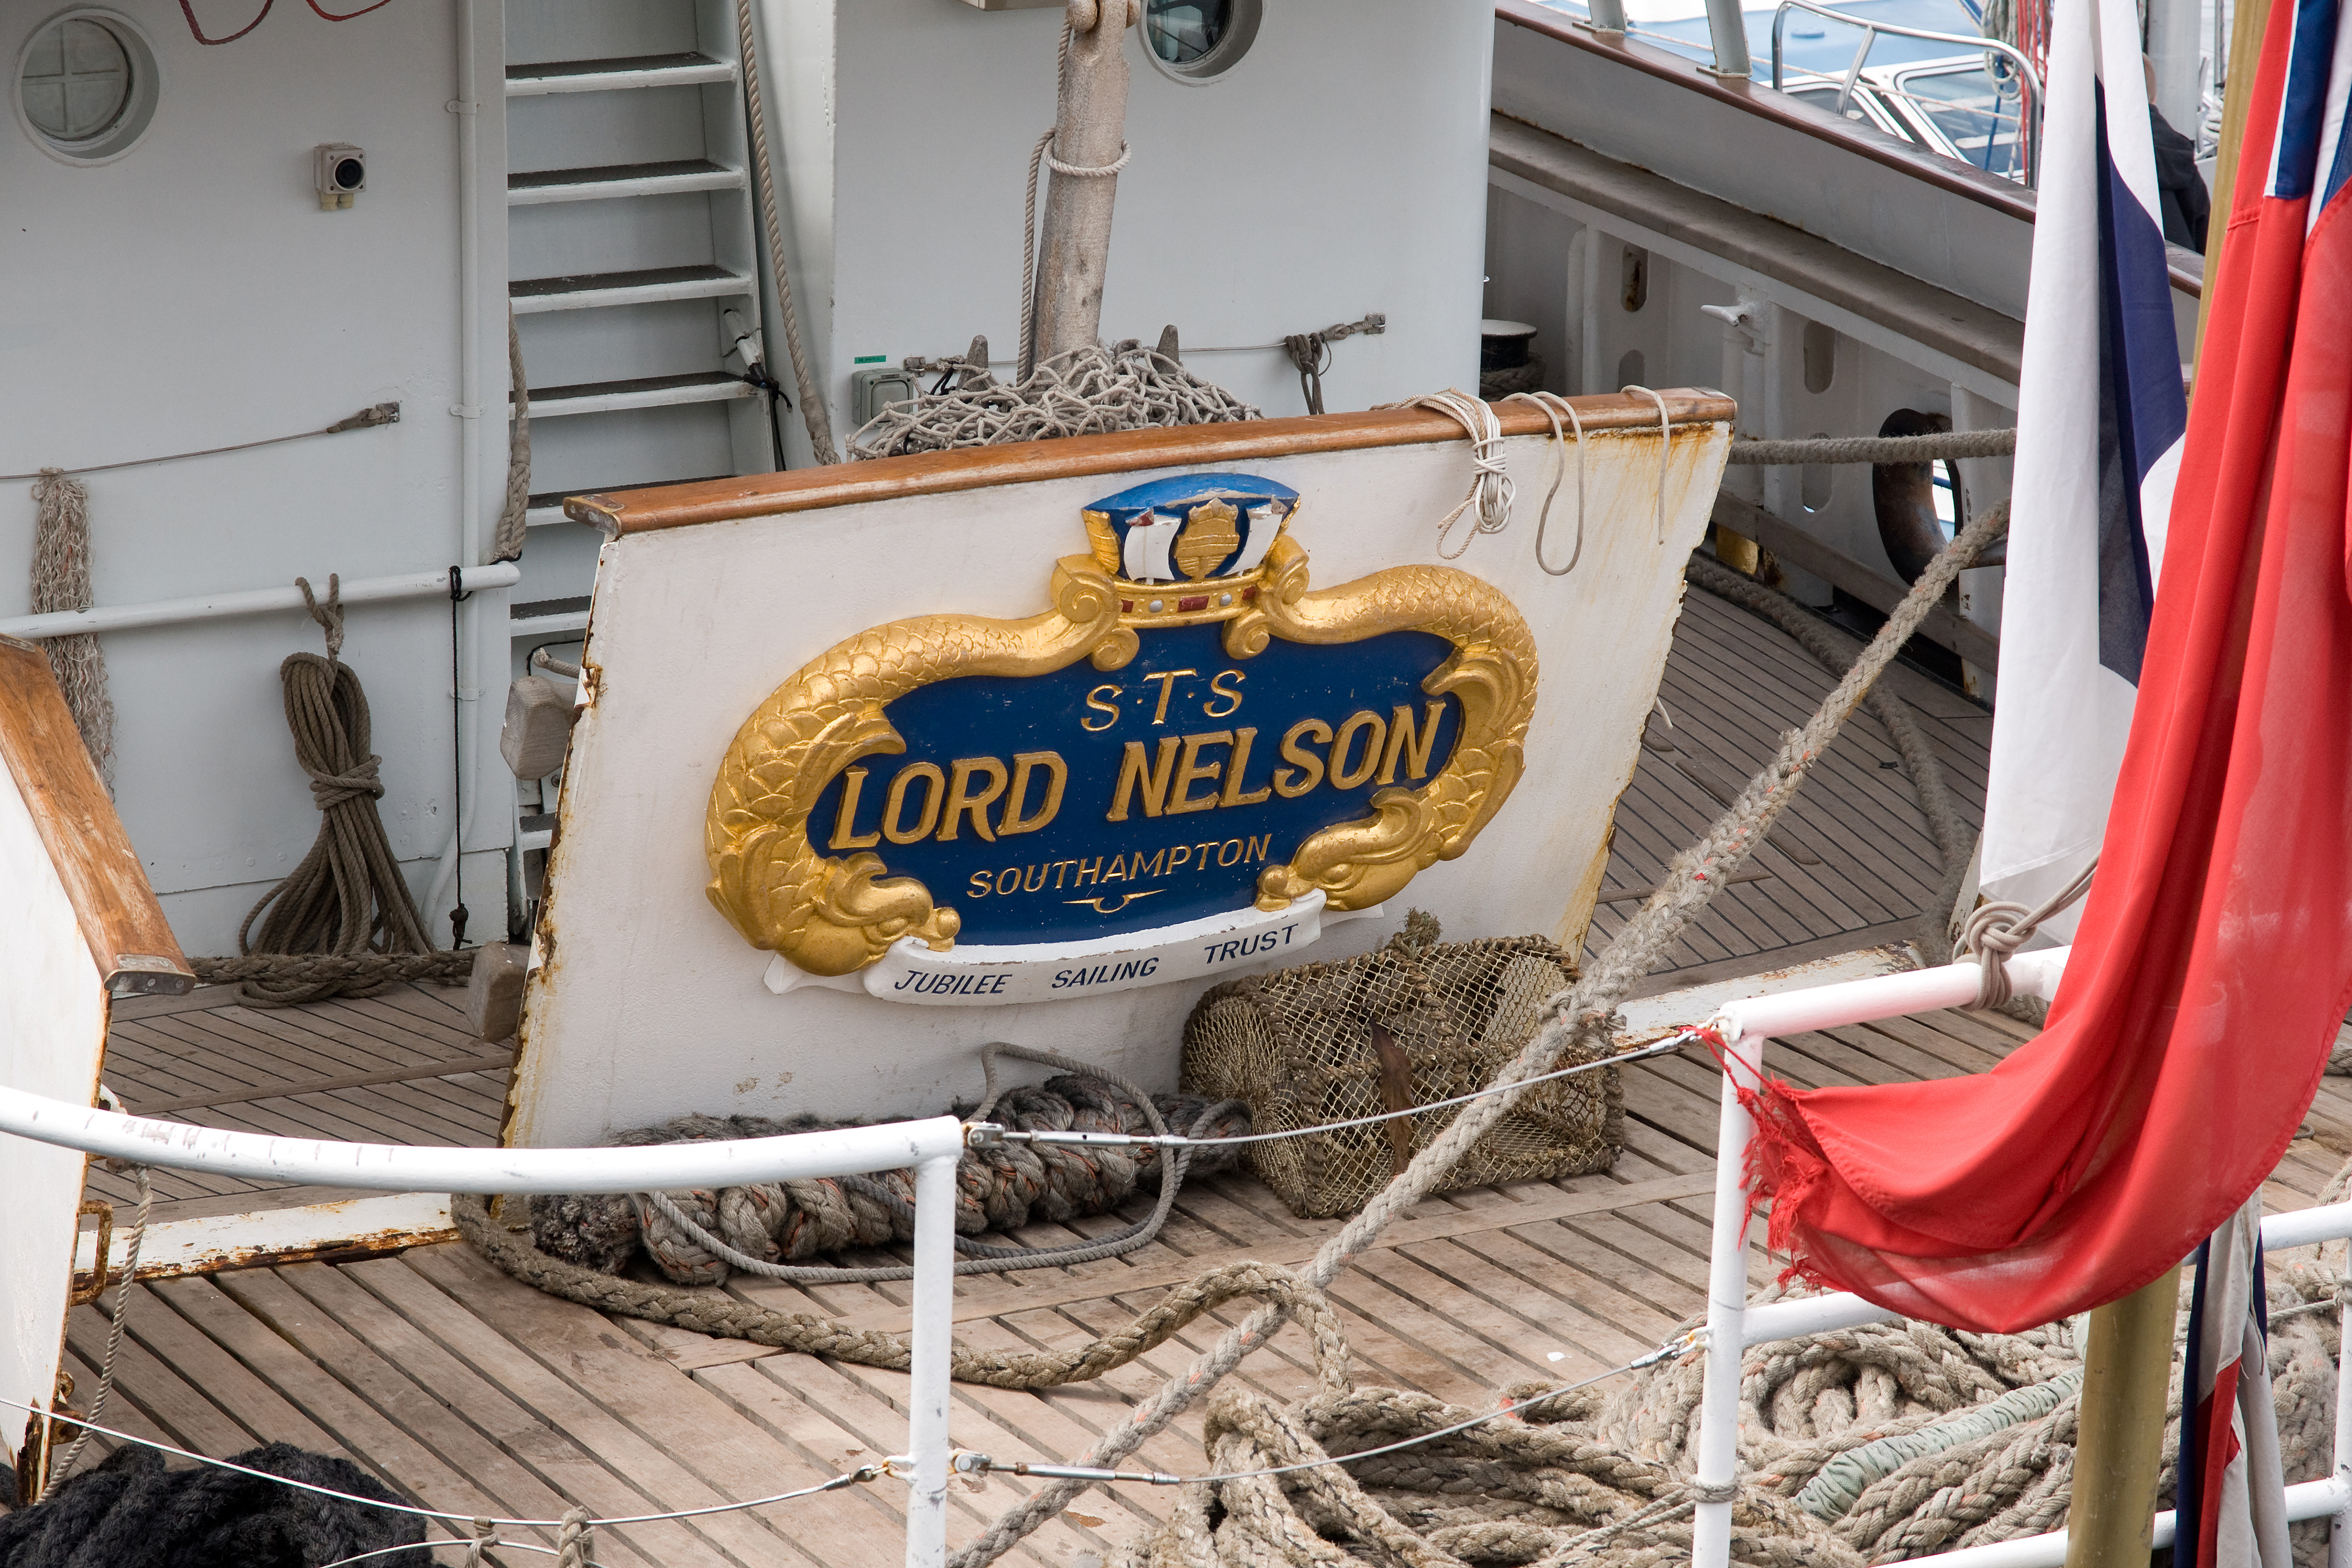 New to Belfast this year - the STS Lord Nelson